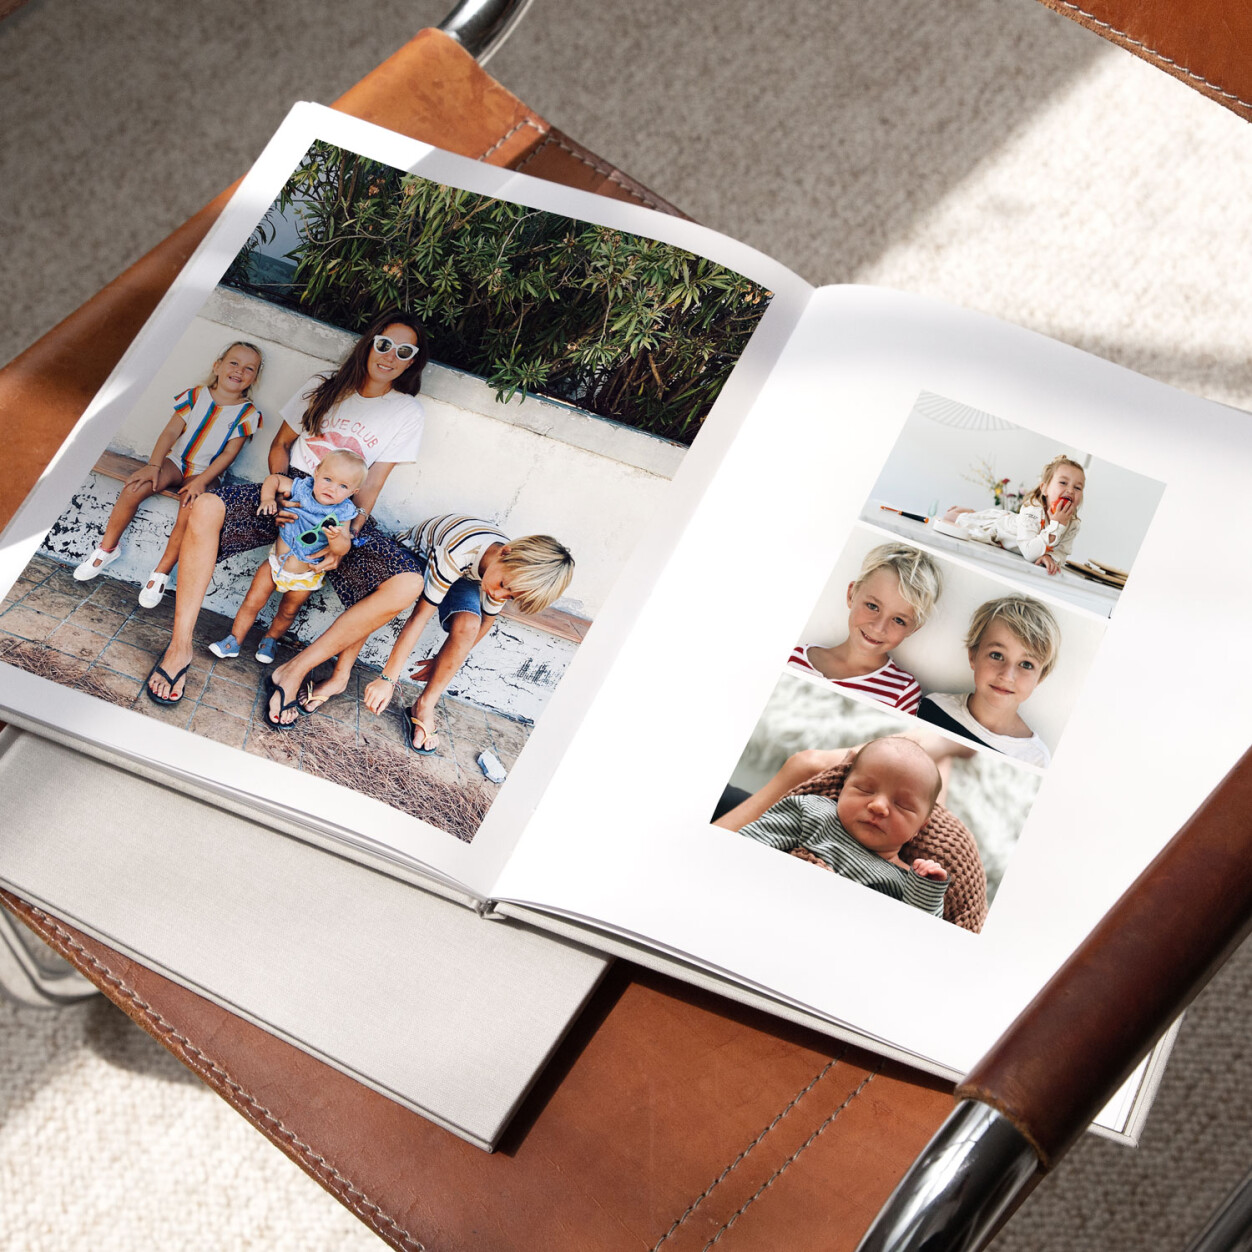 Surprise your family with a photo book